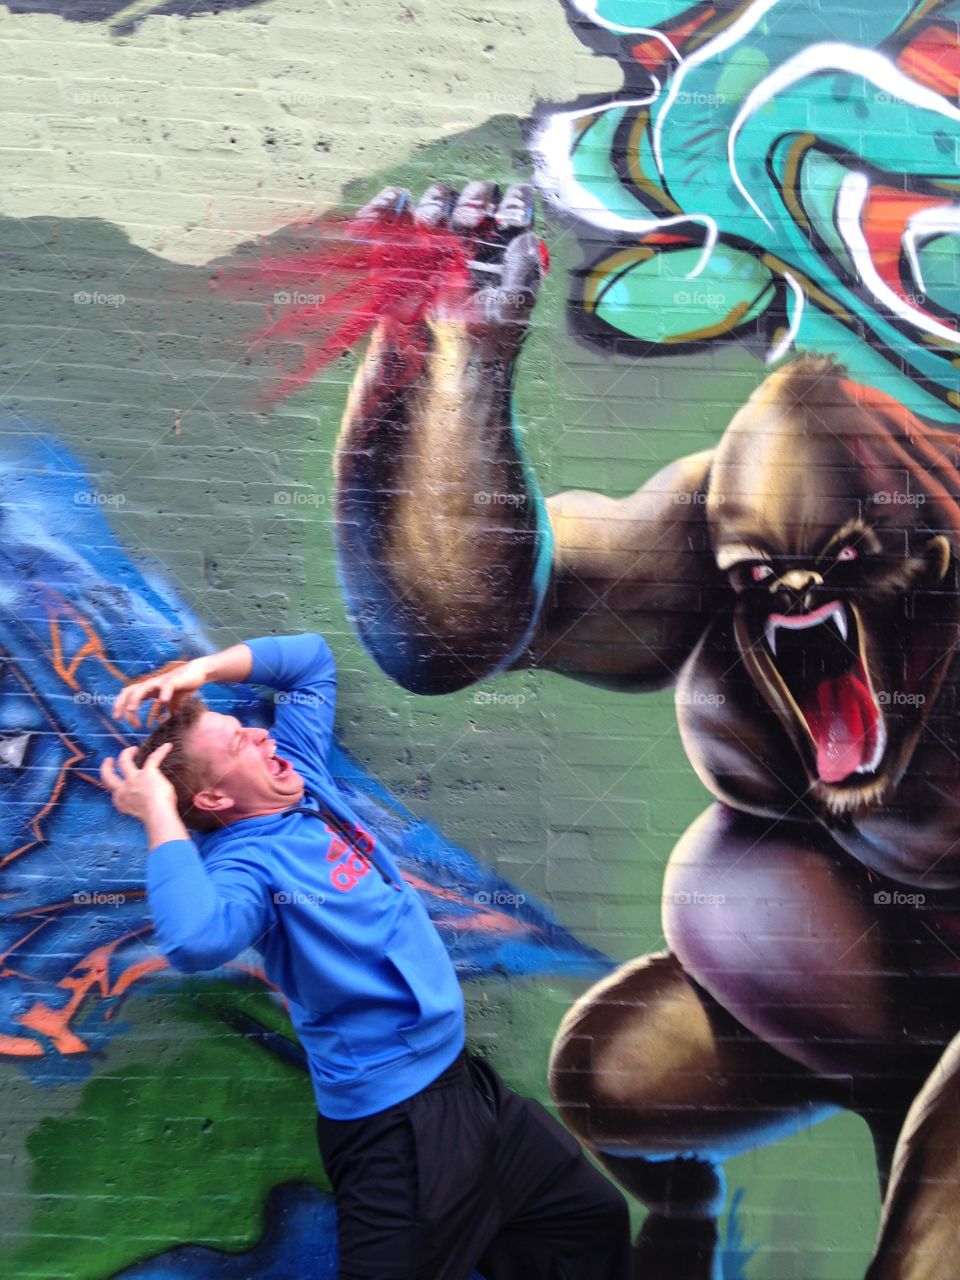 Ape Attack. City wall art comes to life...ape attacking a human 